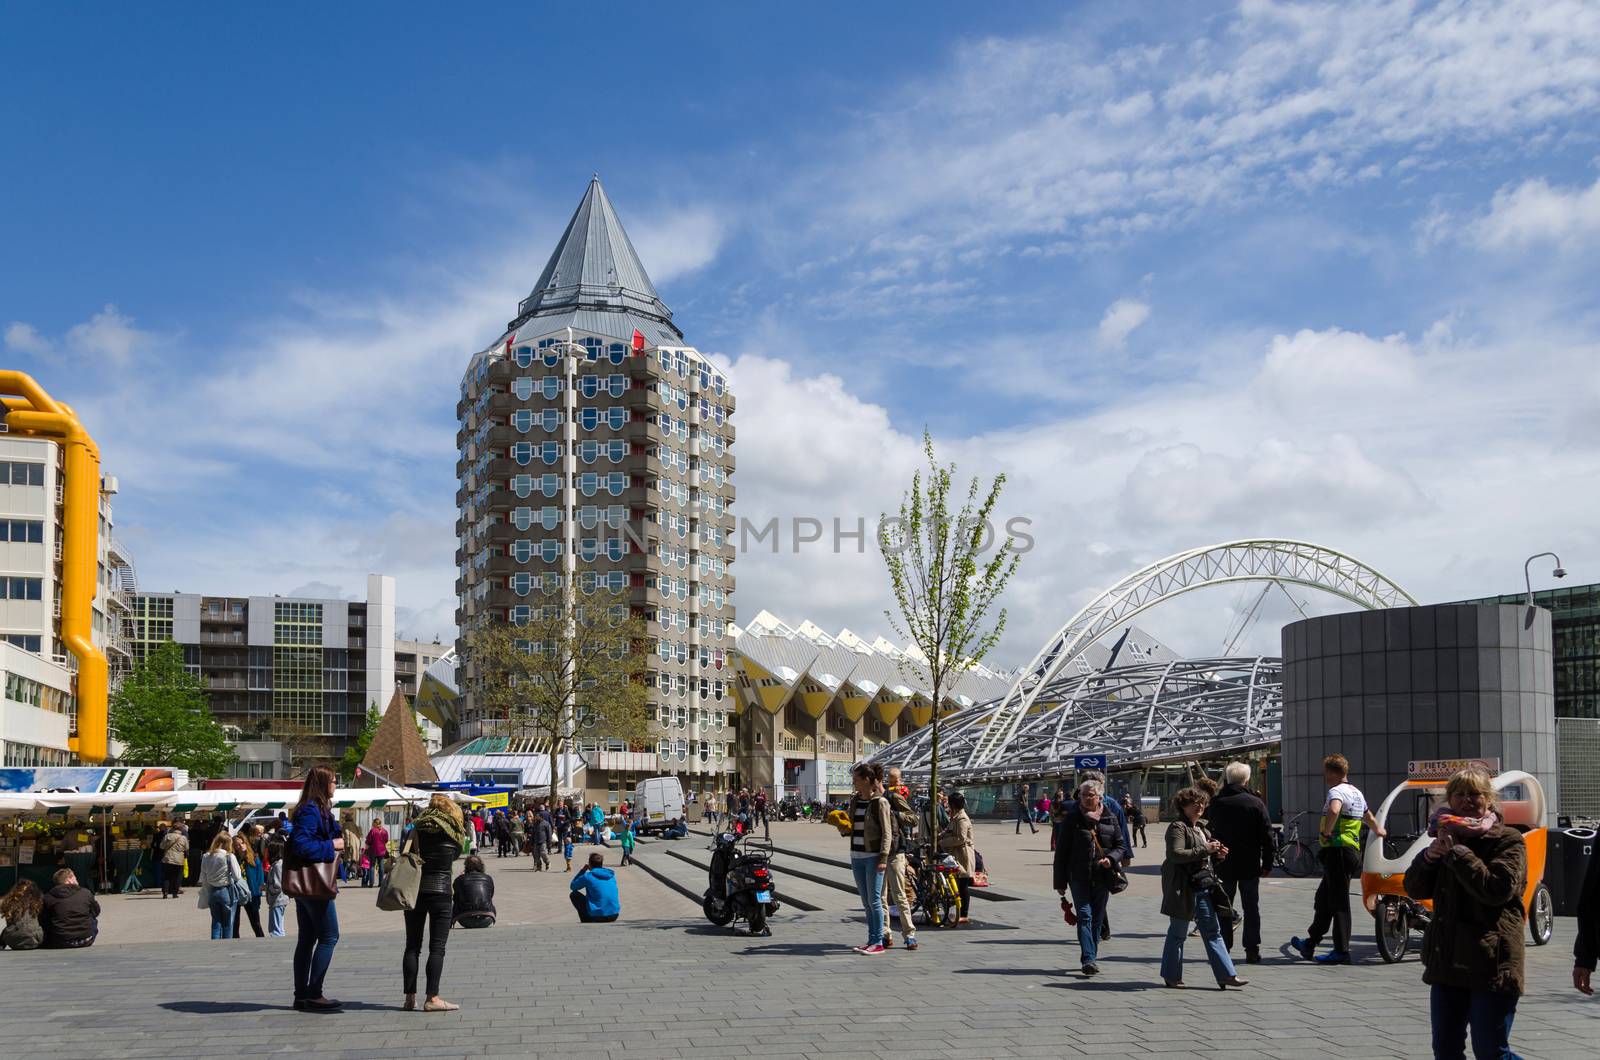 Rotterdam, Netherlands - May 9, 2015: People around Pencil tower, cube houses and Blaak Station in the center of the city on May 9, 2015, in Rotterdam, Blaak district, The Netherlands